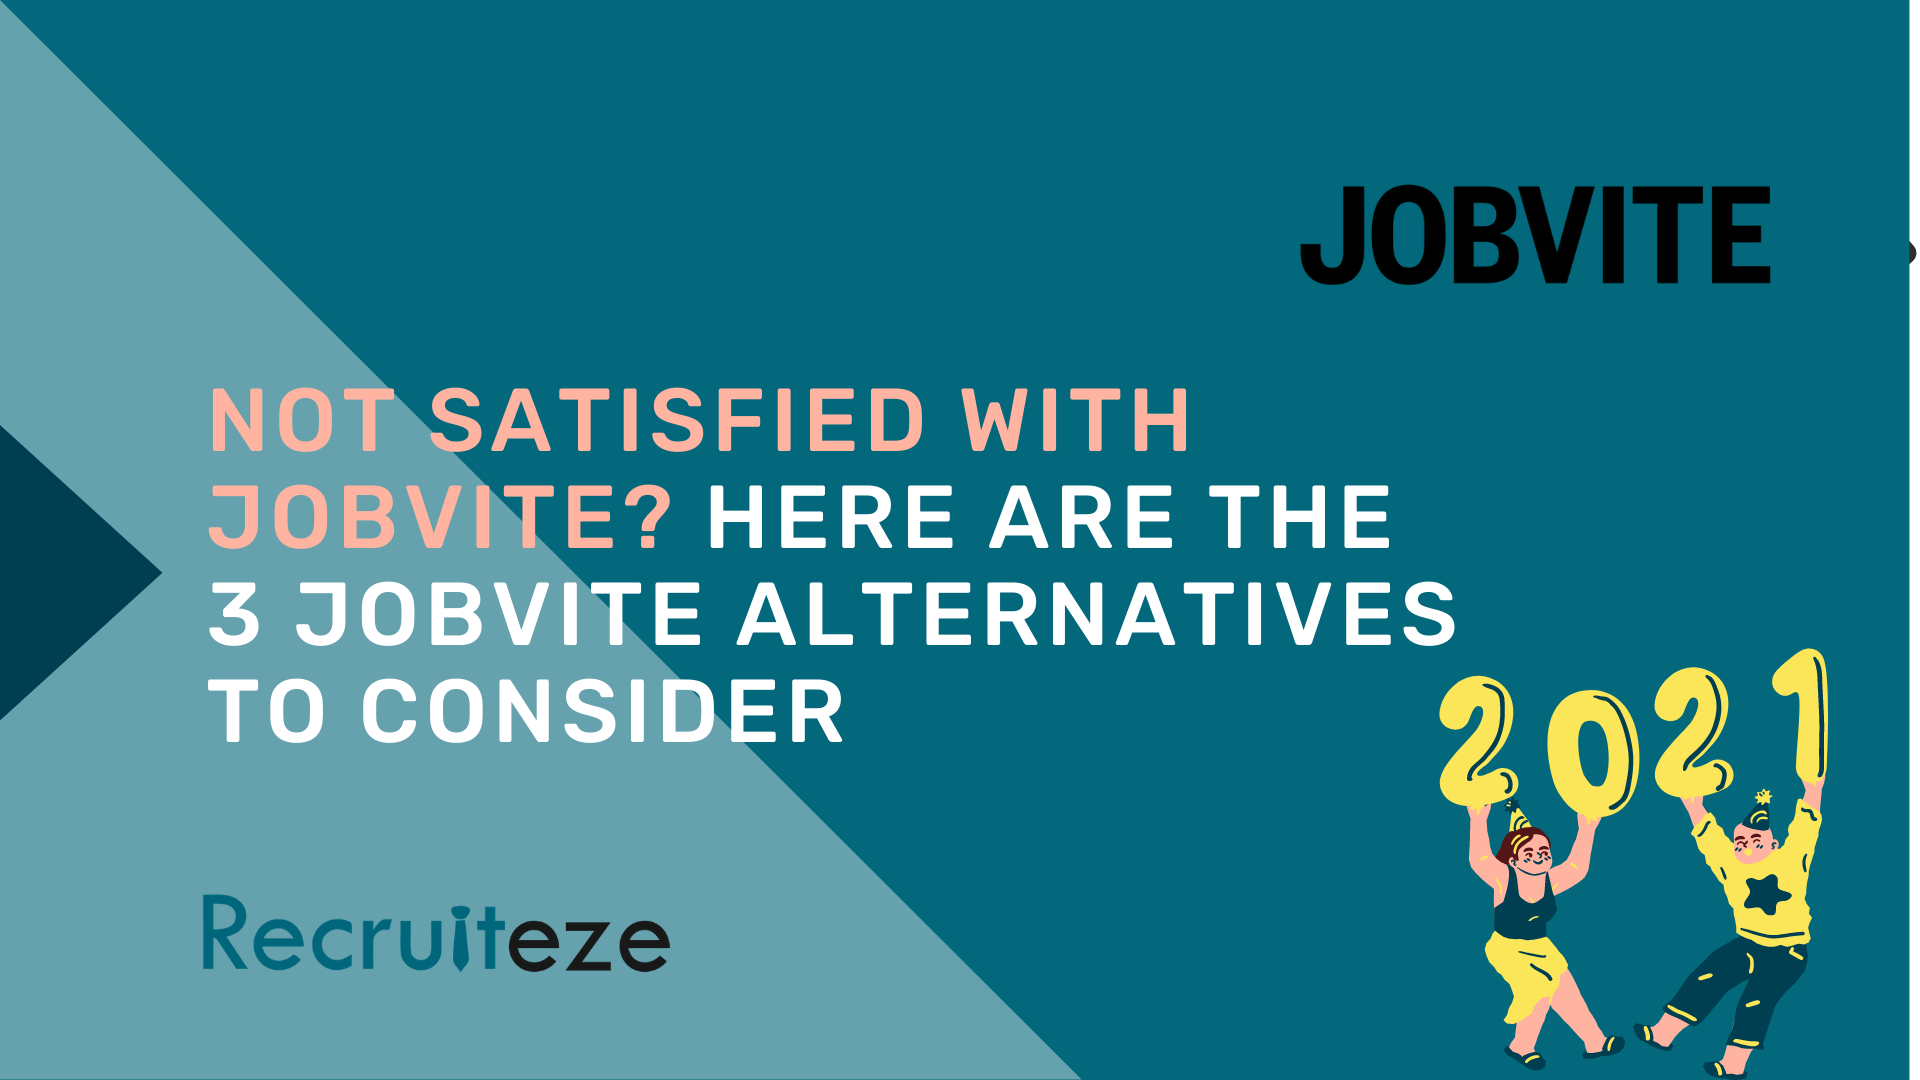 Not Satisfied With Jobvite? Here Are the 3 Jobvite Alternatives to Consider article featured image